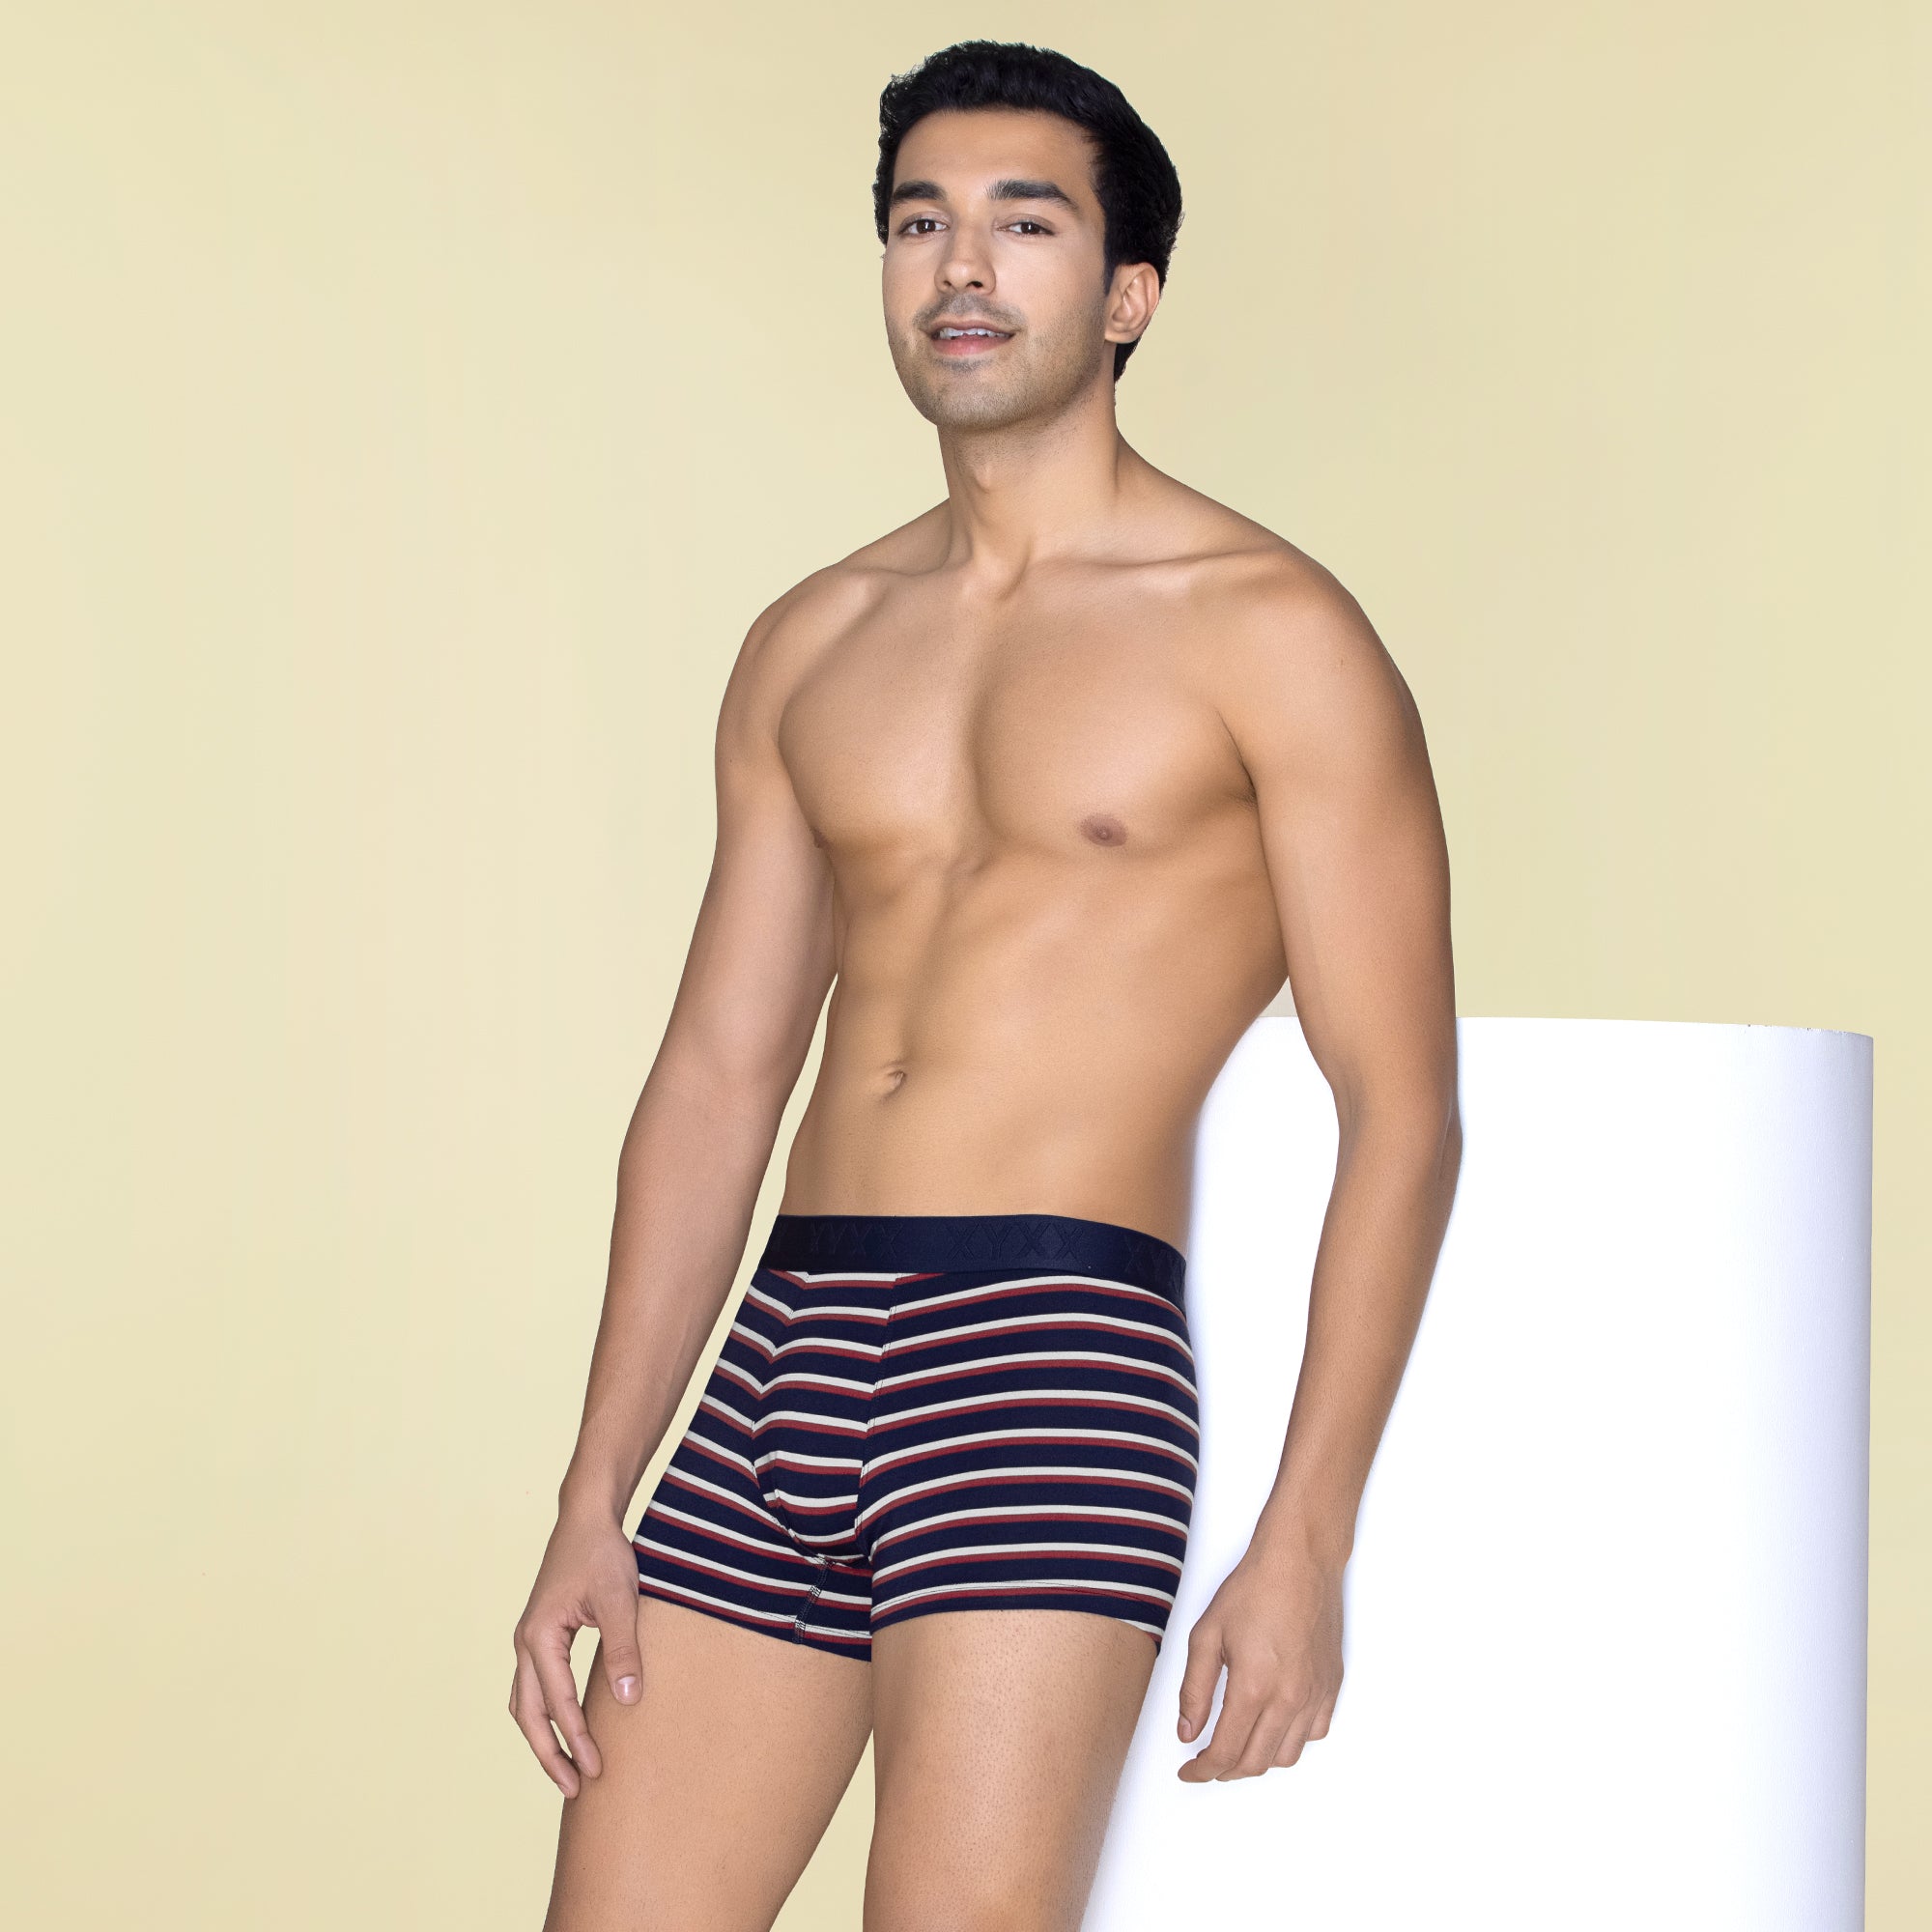 Euro Fashions on X: #StartSomethingSexy with Euro Fashion Inners! Shop  Barcode Brief @  And @IN :   Also @Flipkart :  #vest  #brief #trunk #mensfashion #trunks #underwear #men